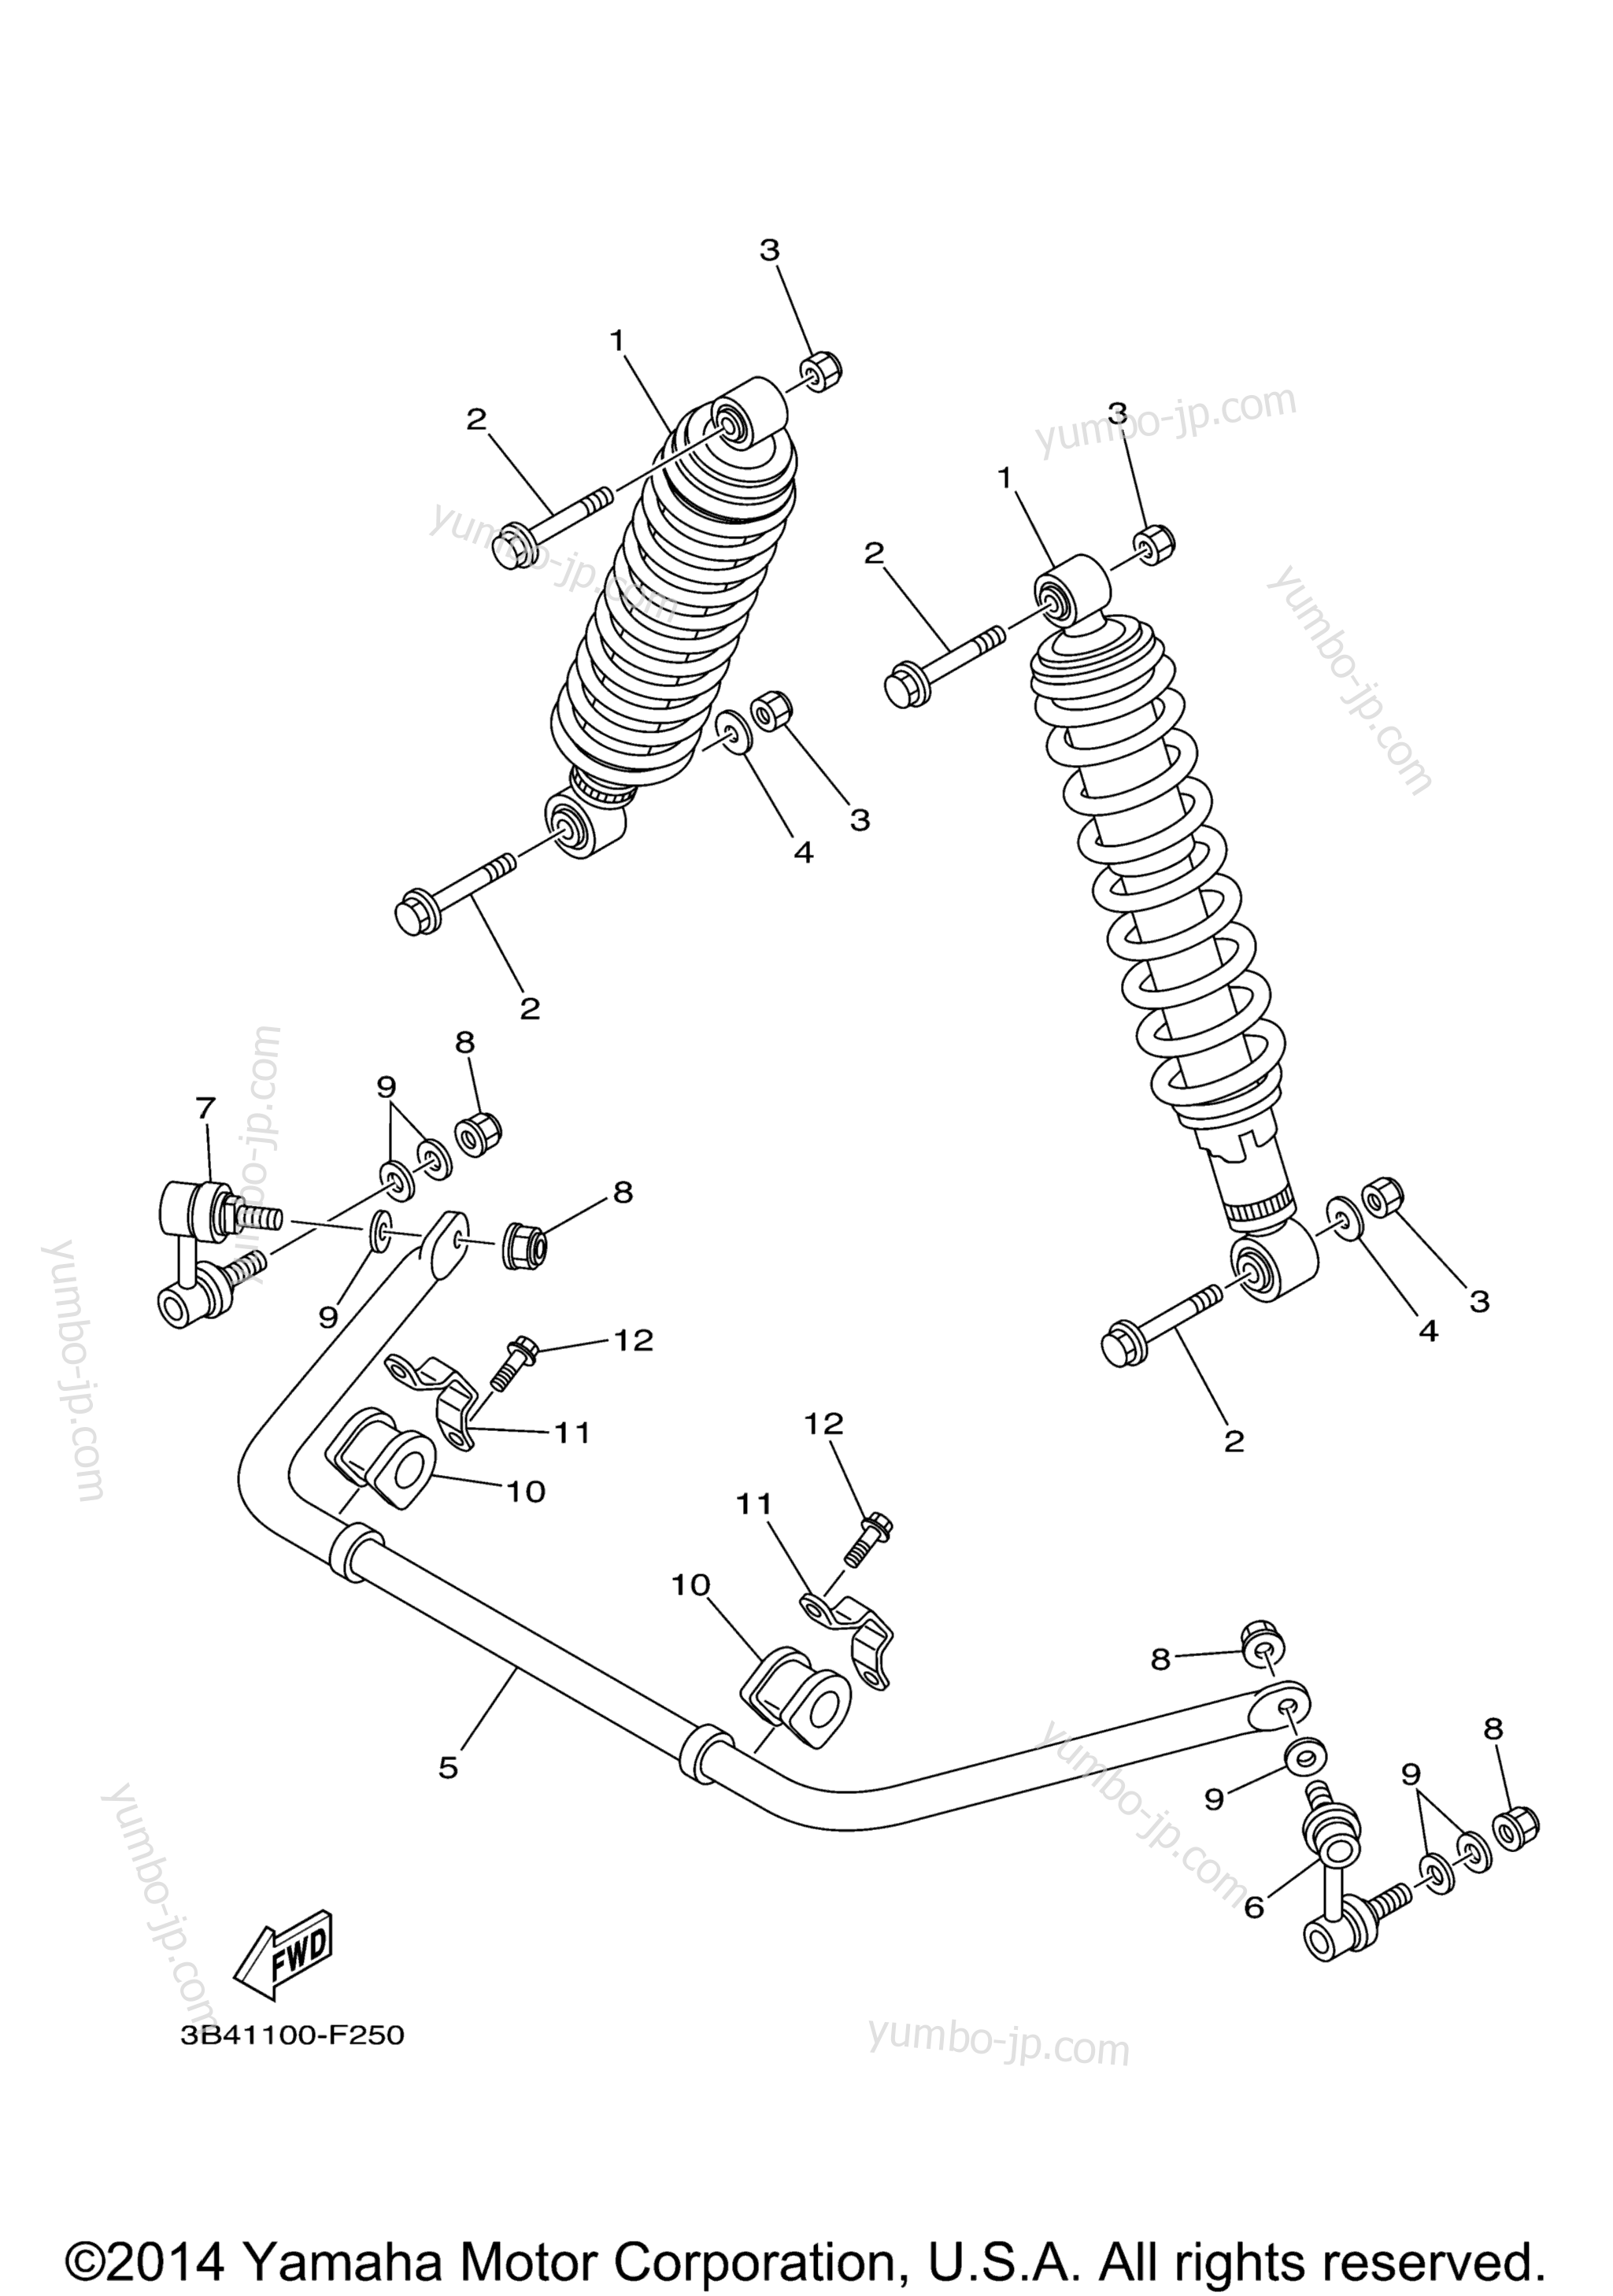 Rear Suspension for ATVs YAMAHA GRIZZLY 550 4WD (YFM5FGAL) 2011 year